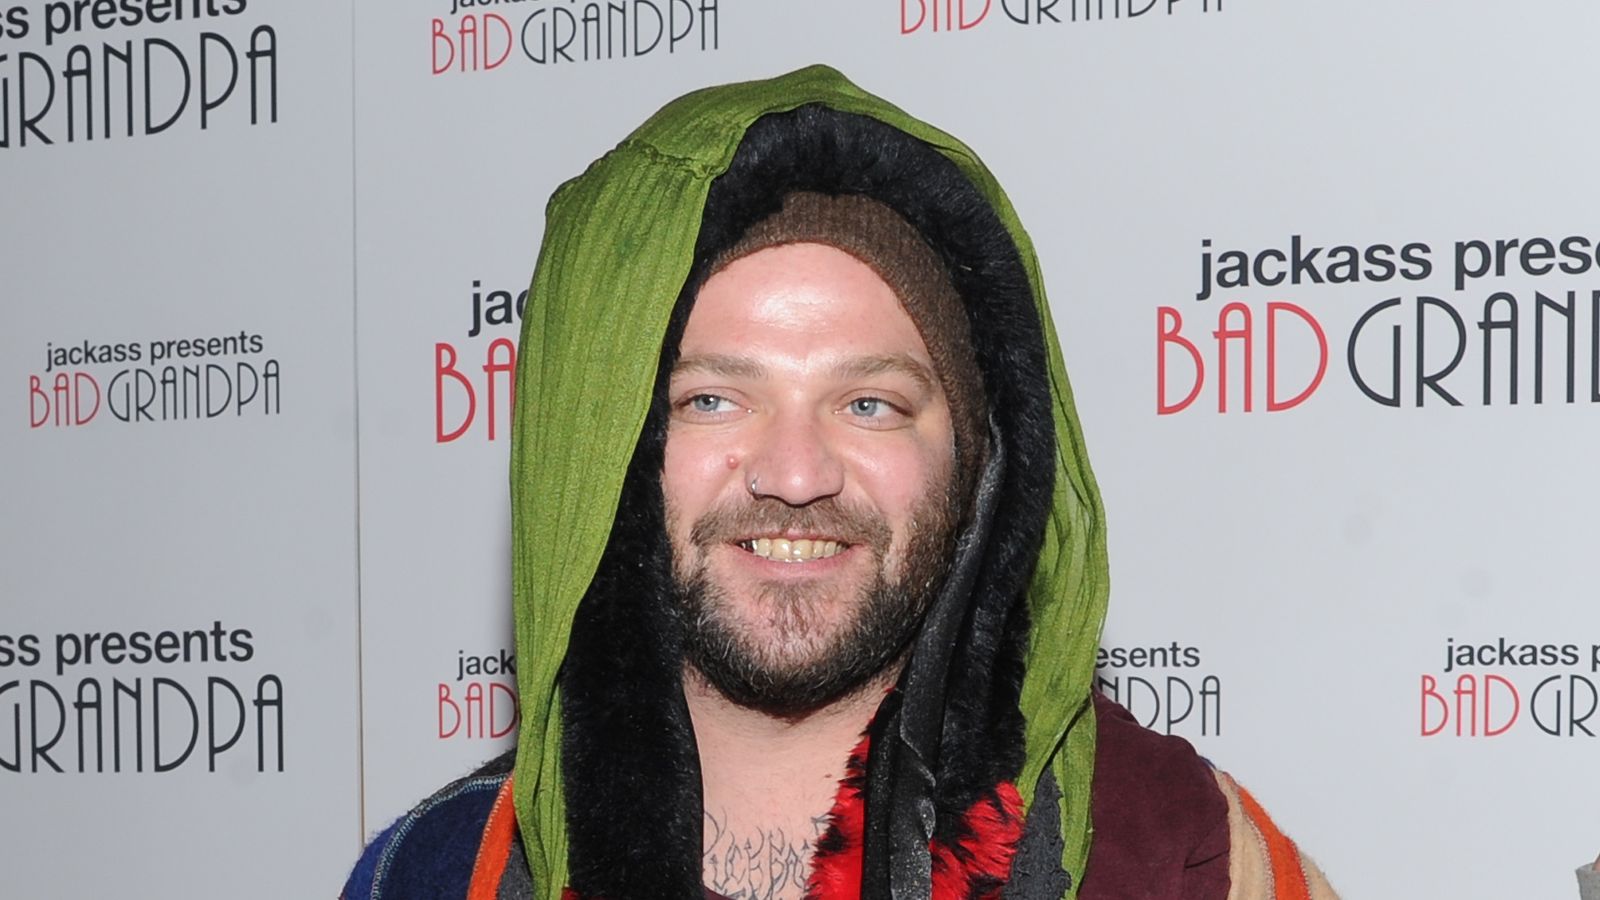 Bam Margera: Jackass star surrenders to Pennsylvania police over alleged assault, harassment and terroristic  threats